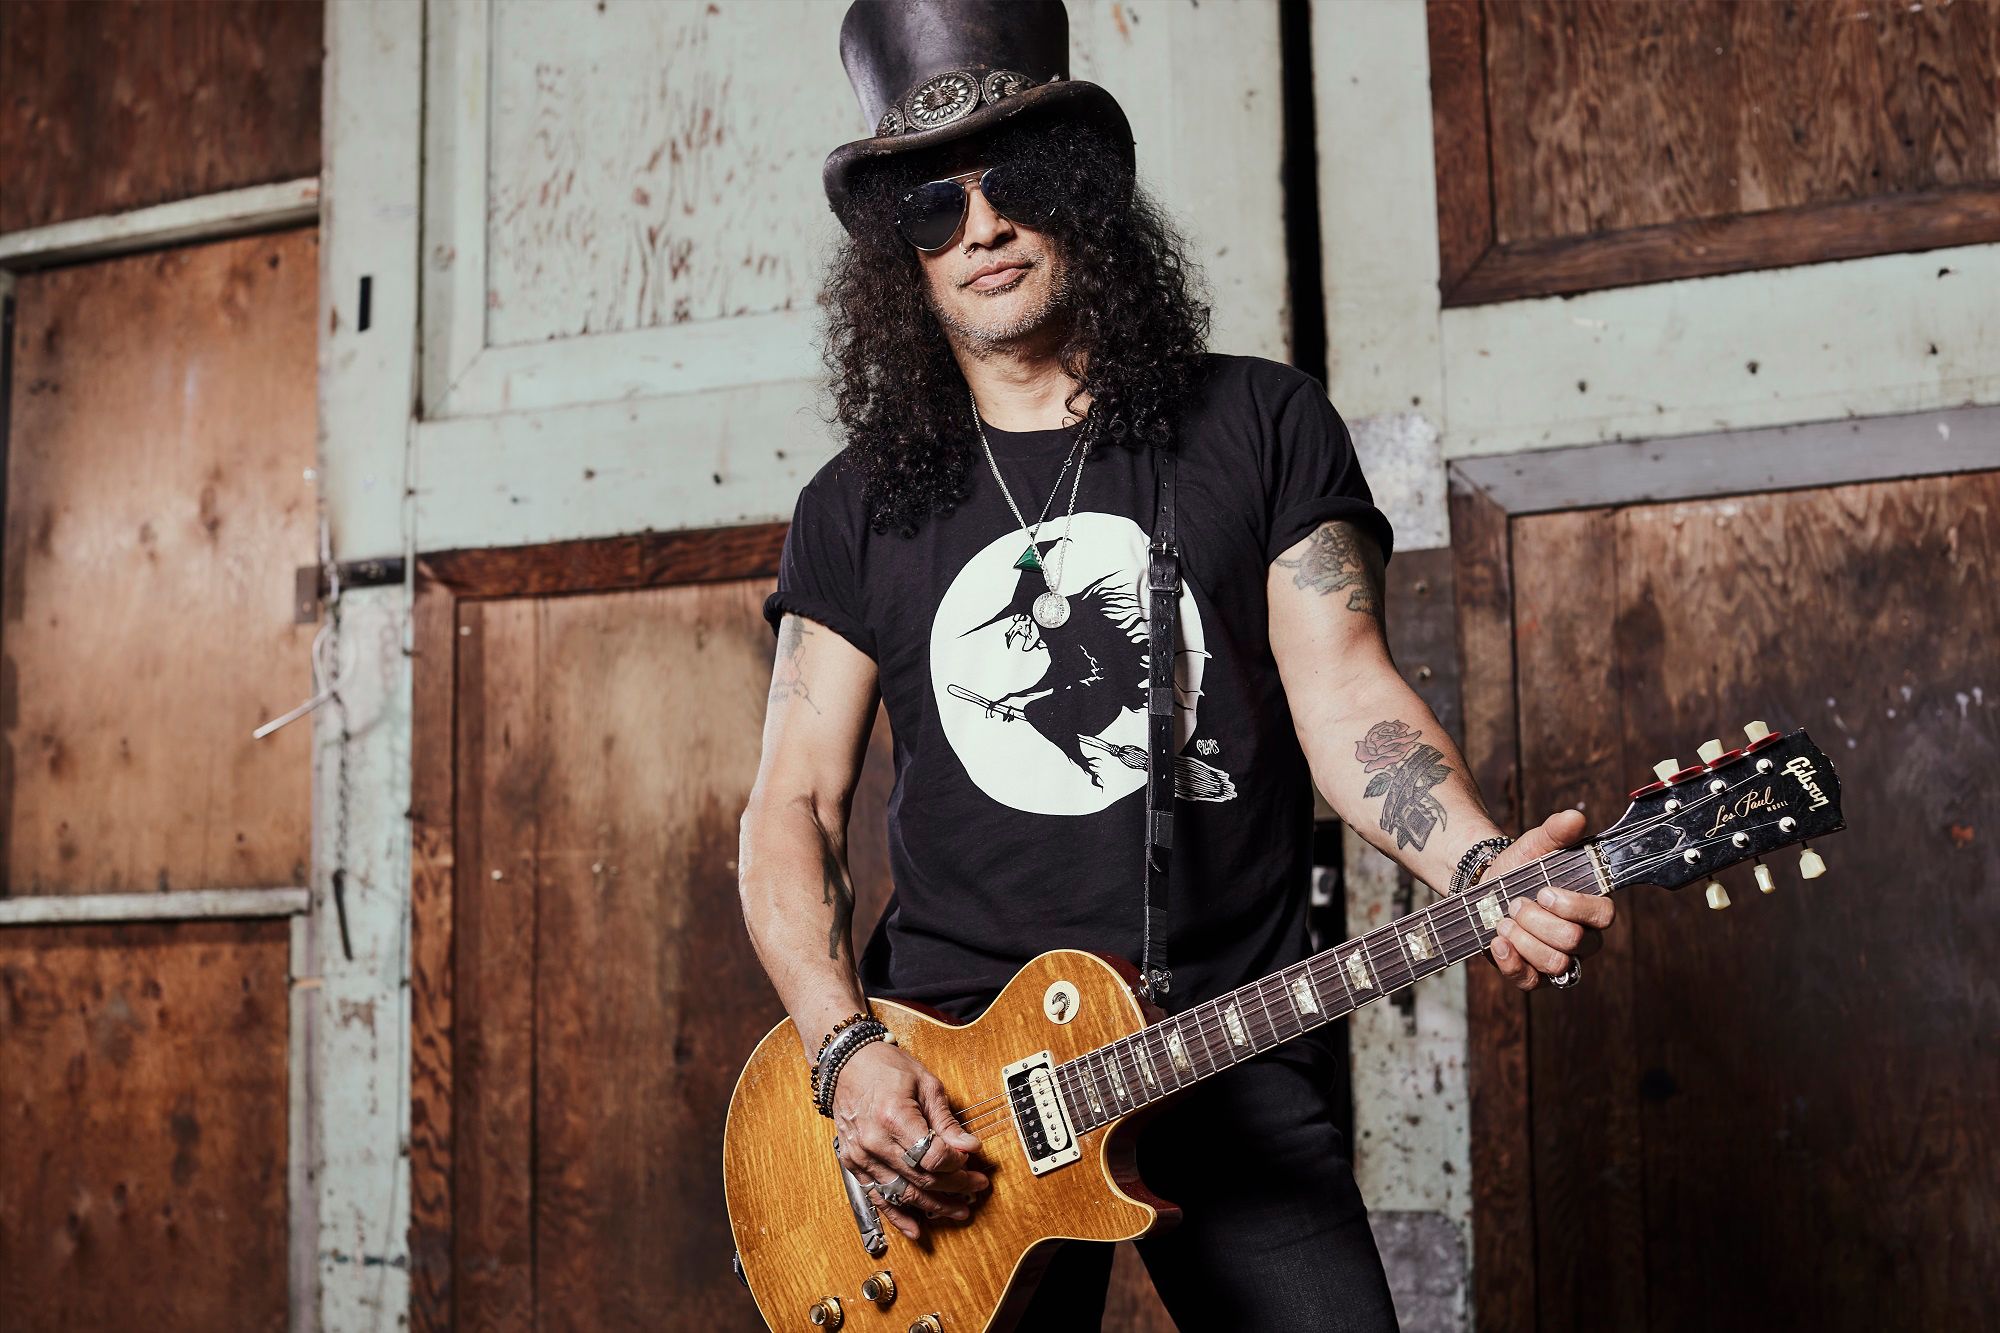 Slash's Journey from Guns N' Roses Lead Guitarist to Solo Projects